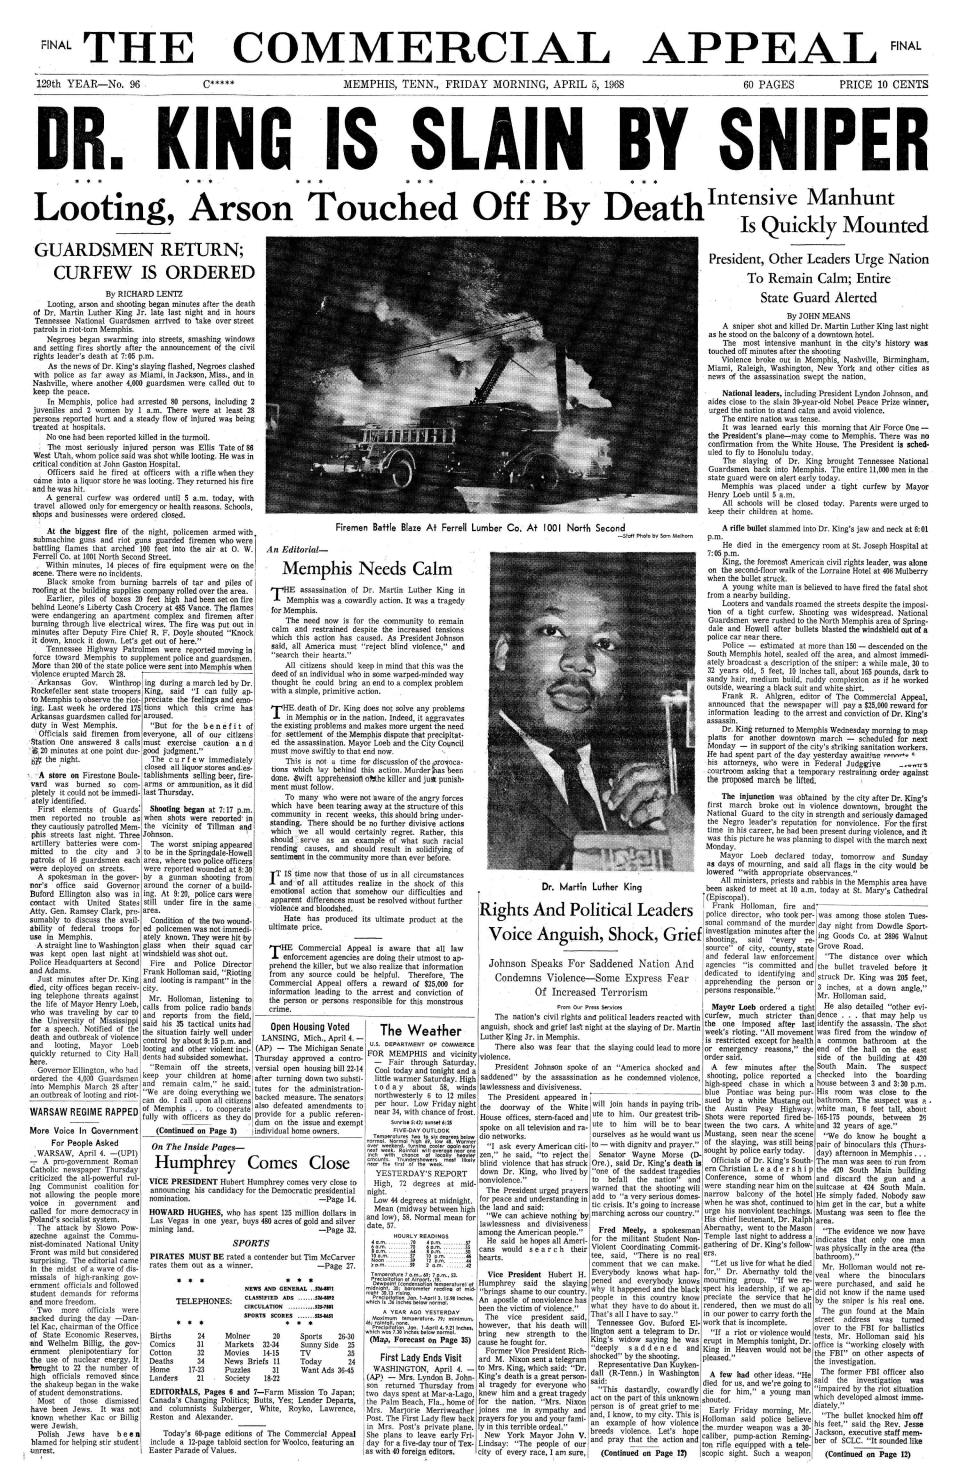 The Commercial Appeal front page on April 5, 1968, the day after the Rev. Martin Luther King Jr. was assassinated in Memphis.